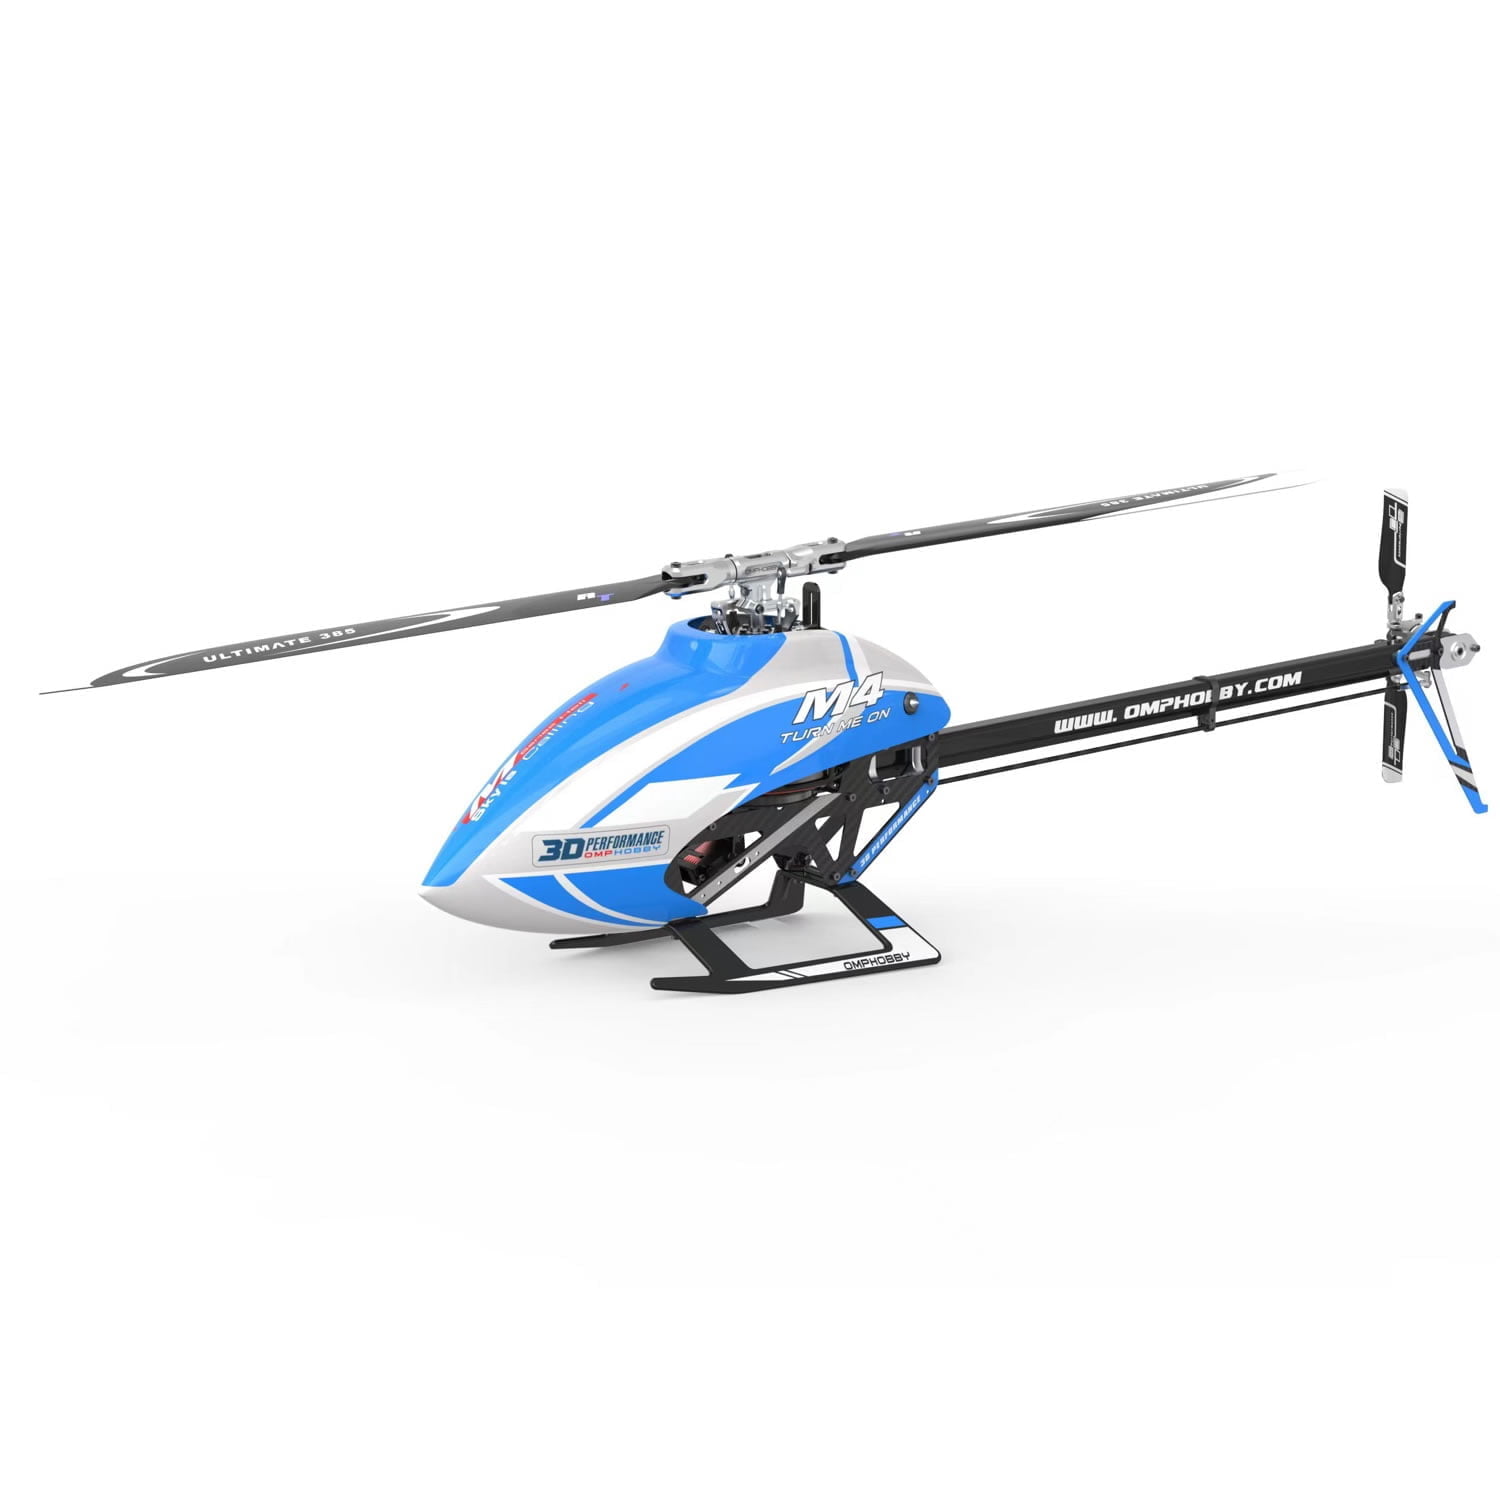 OMP Hobby M4 RC Helicopter - Free Postage!